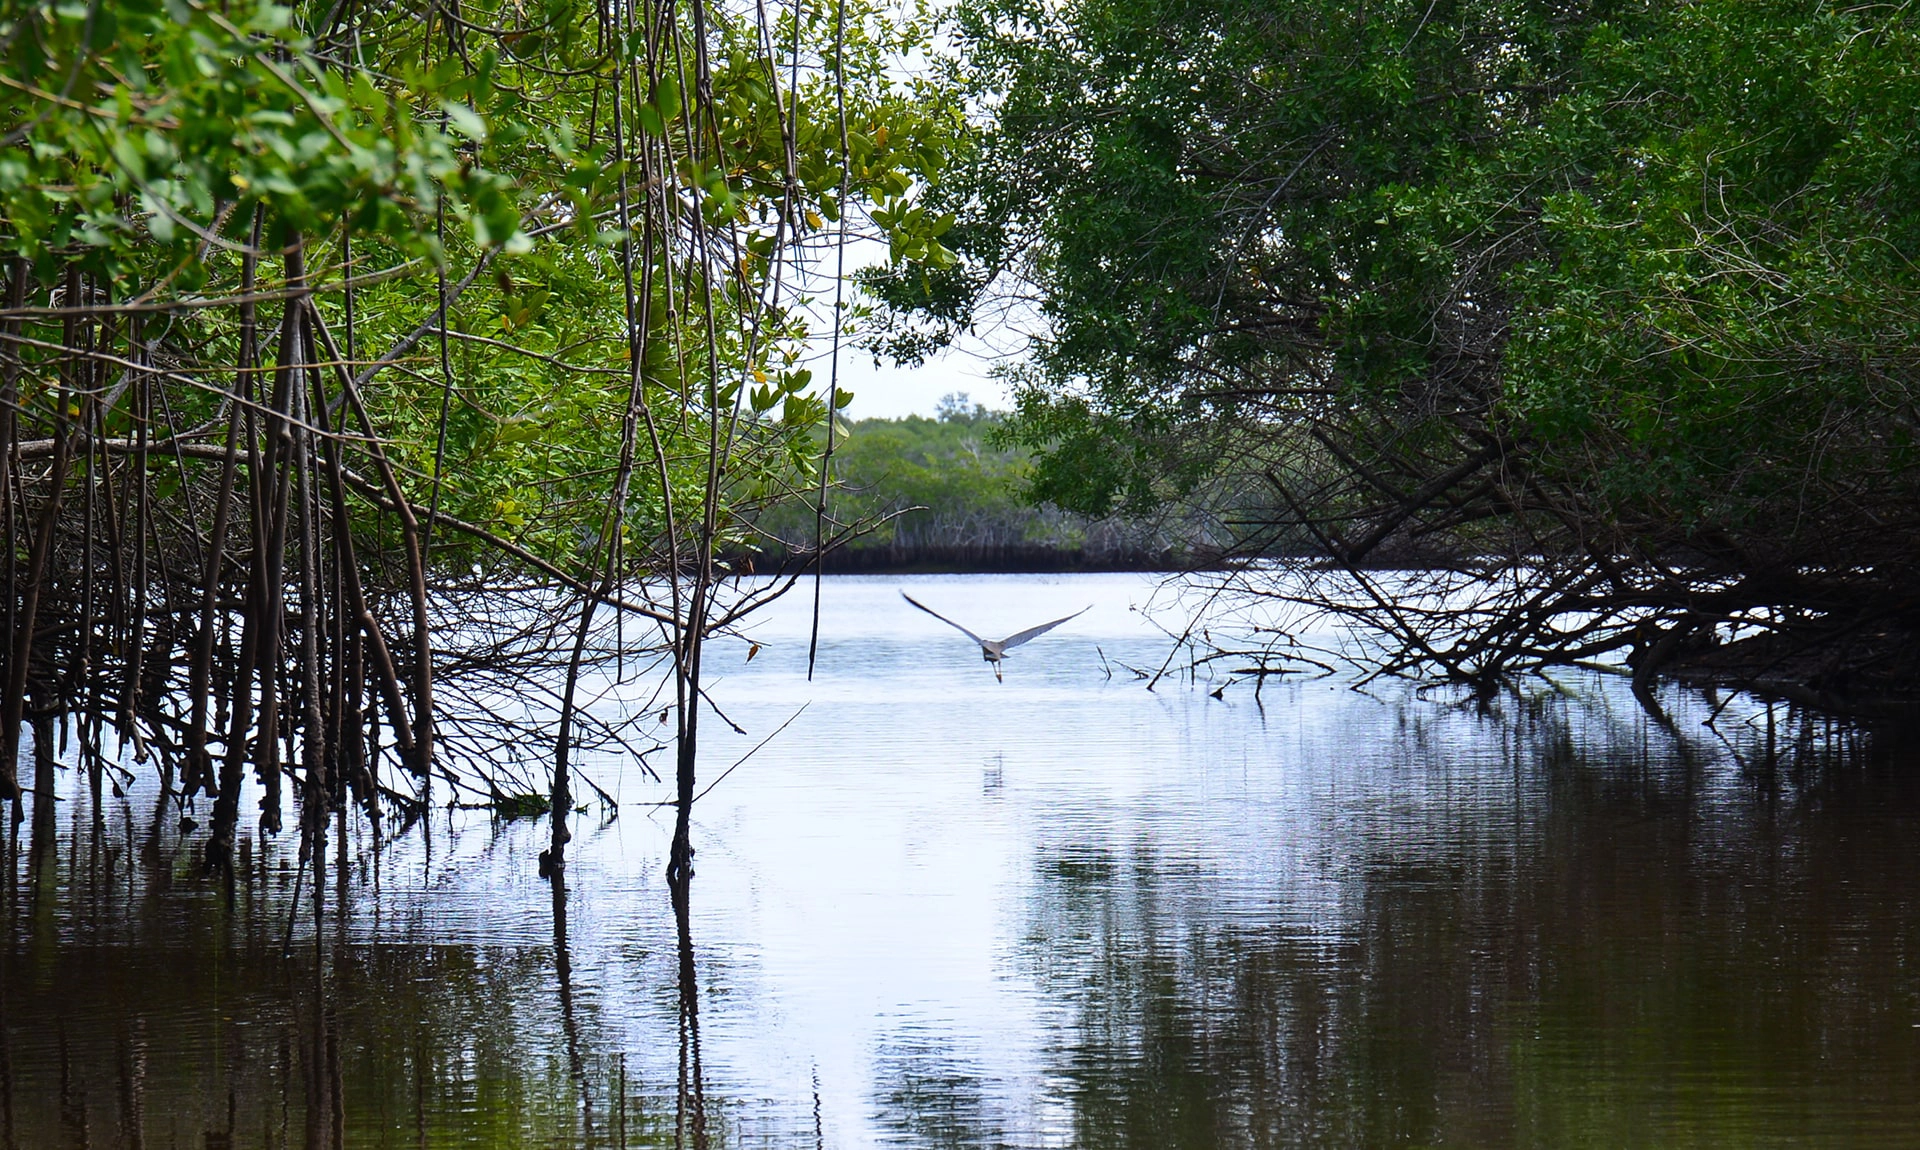 Mangroves with Bird Everglades National Forest Copyright Denise Wauters 1920 x 1050 DSC 4785 min